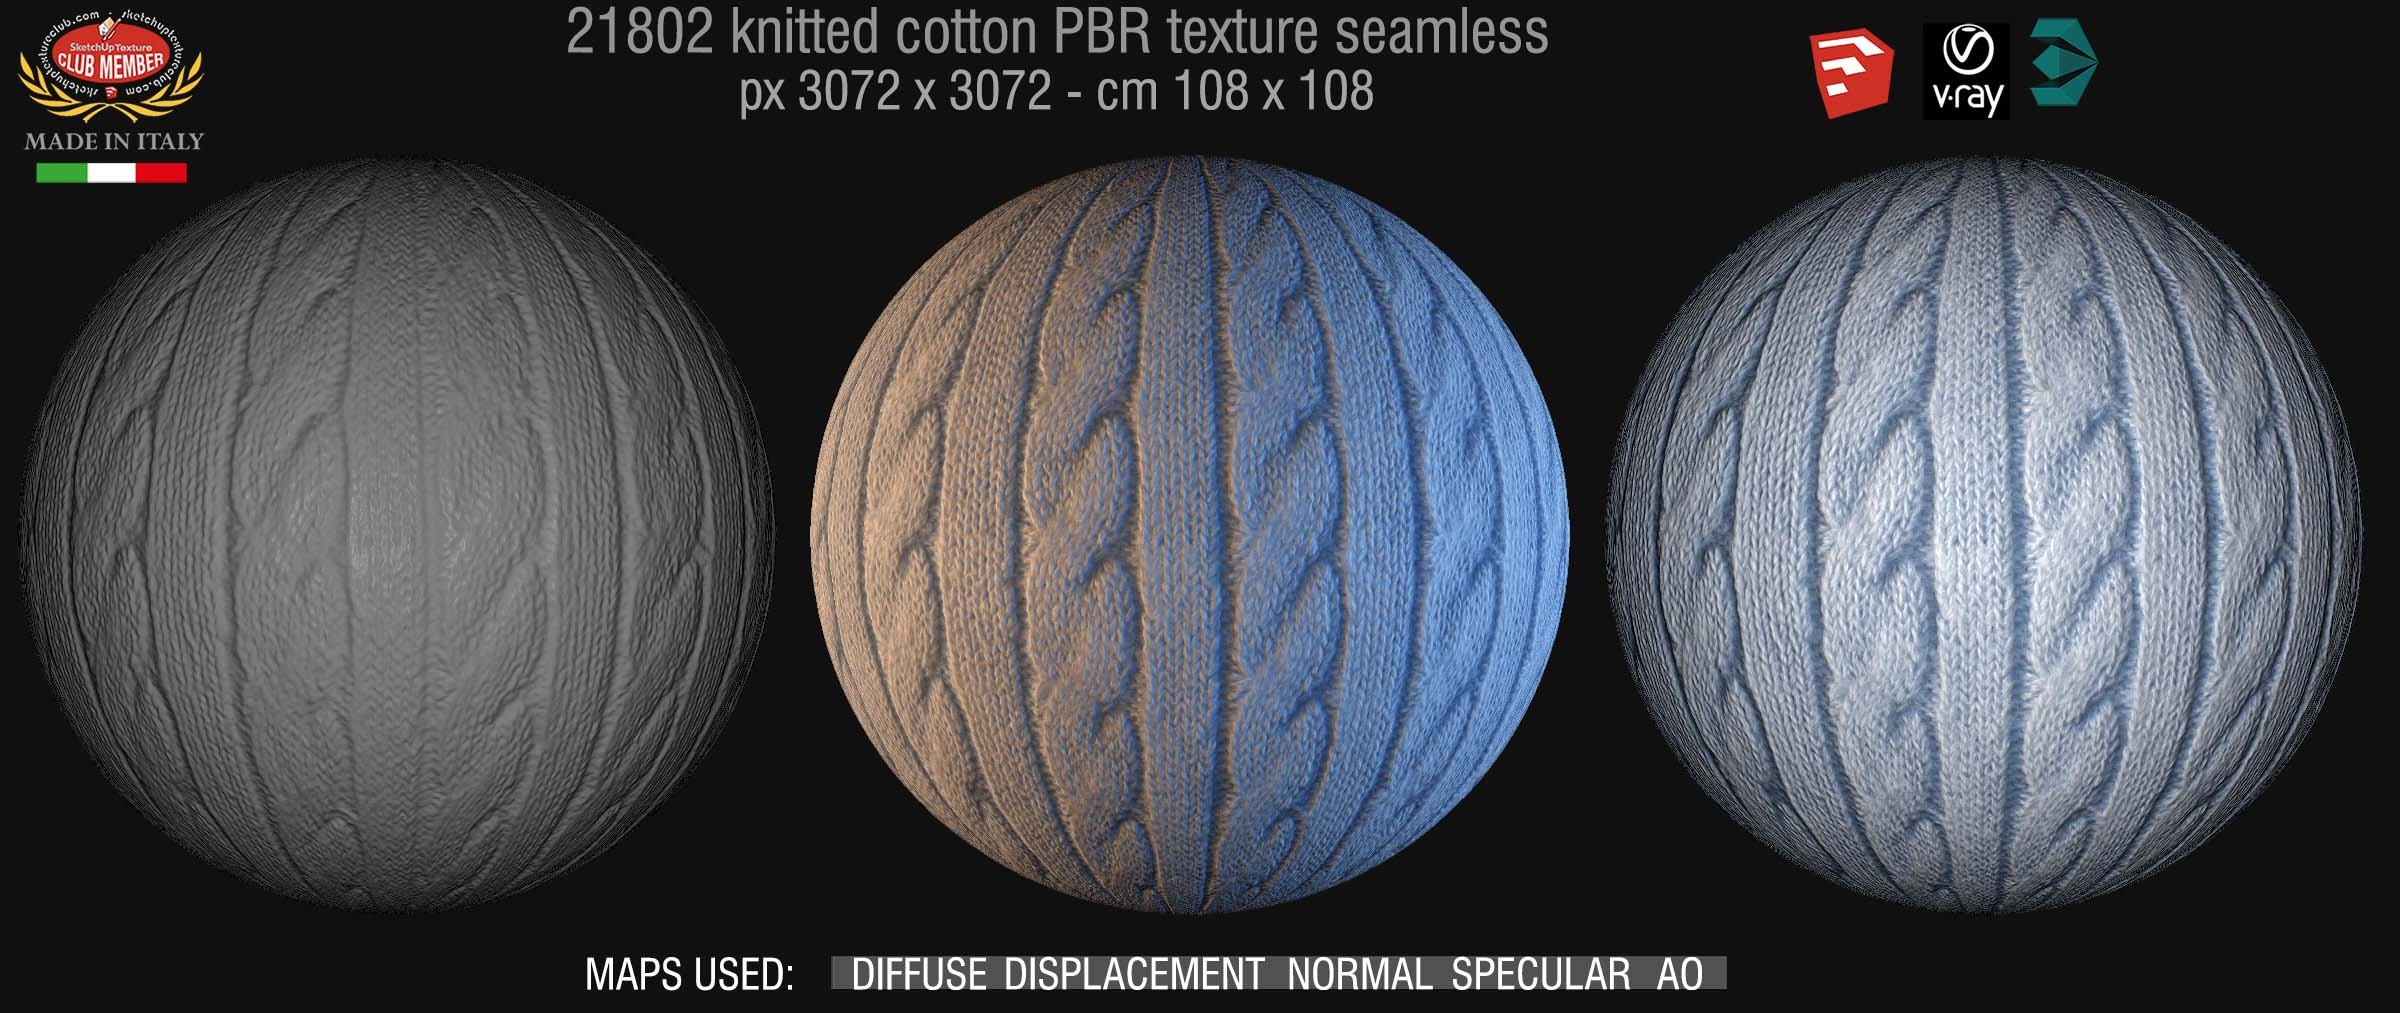 21802 wool knitted PBR texture seamless DEMO